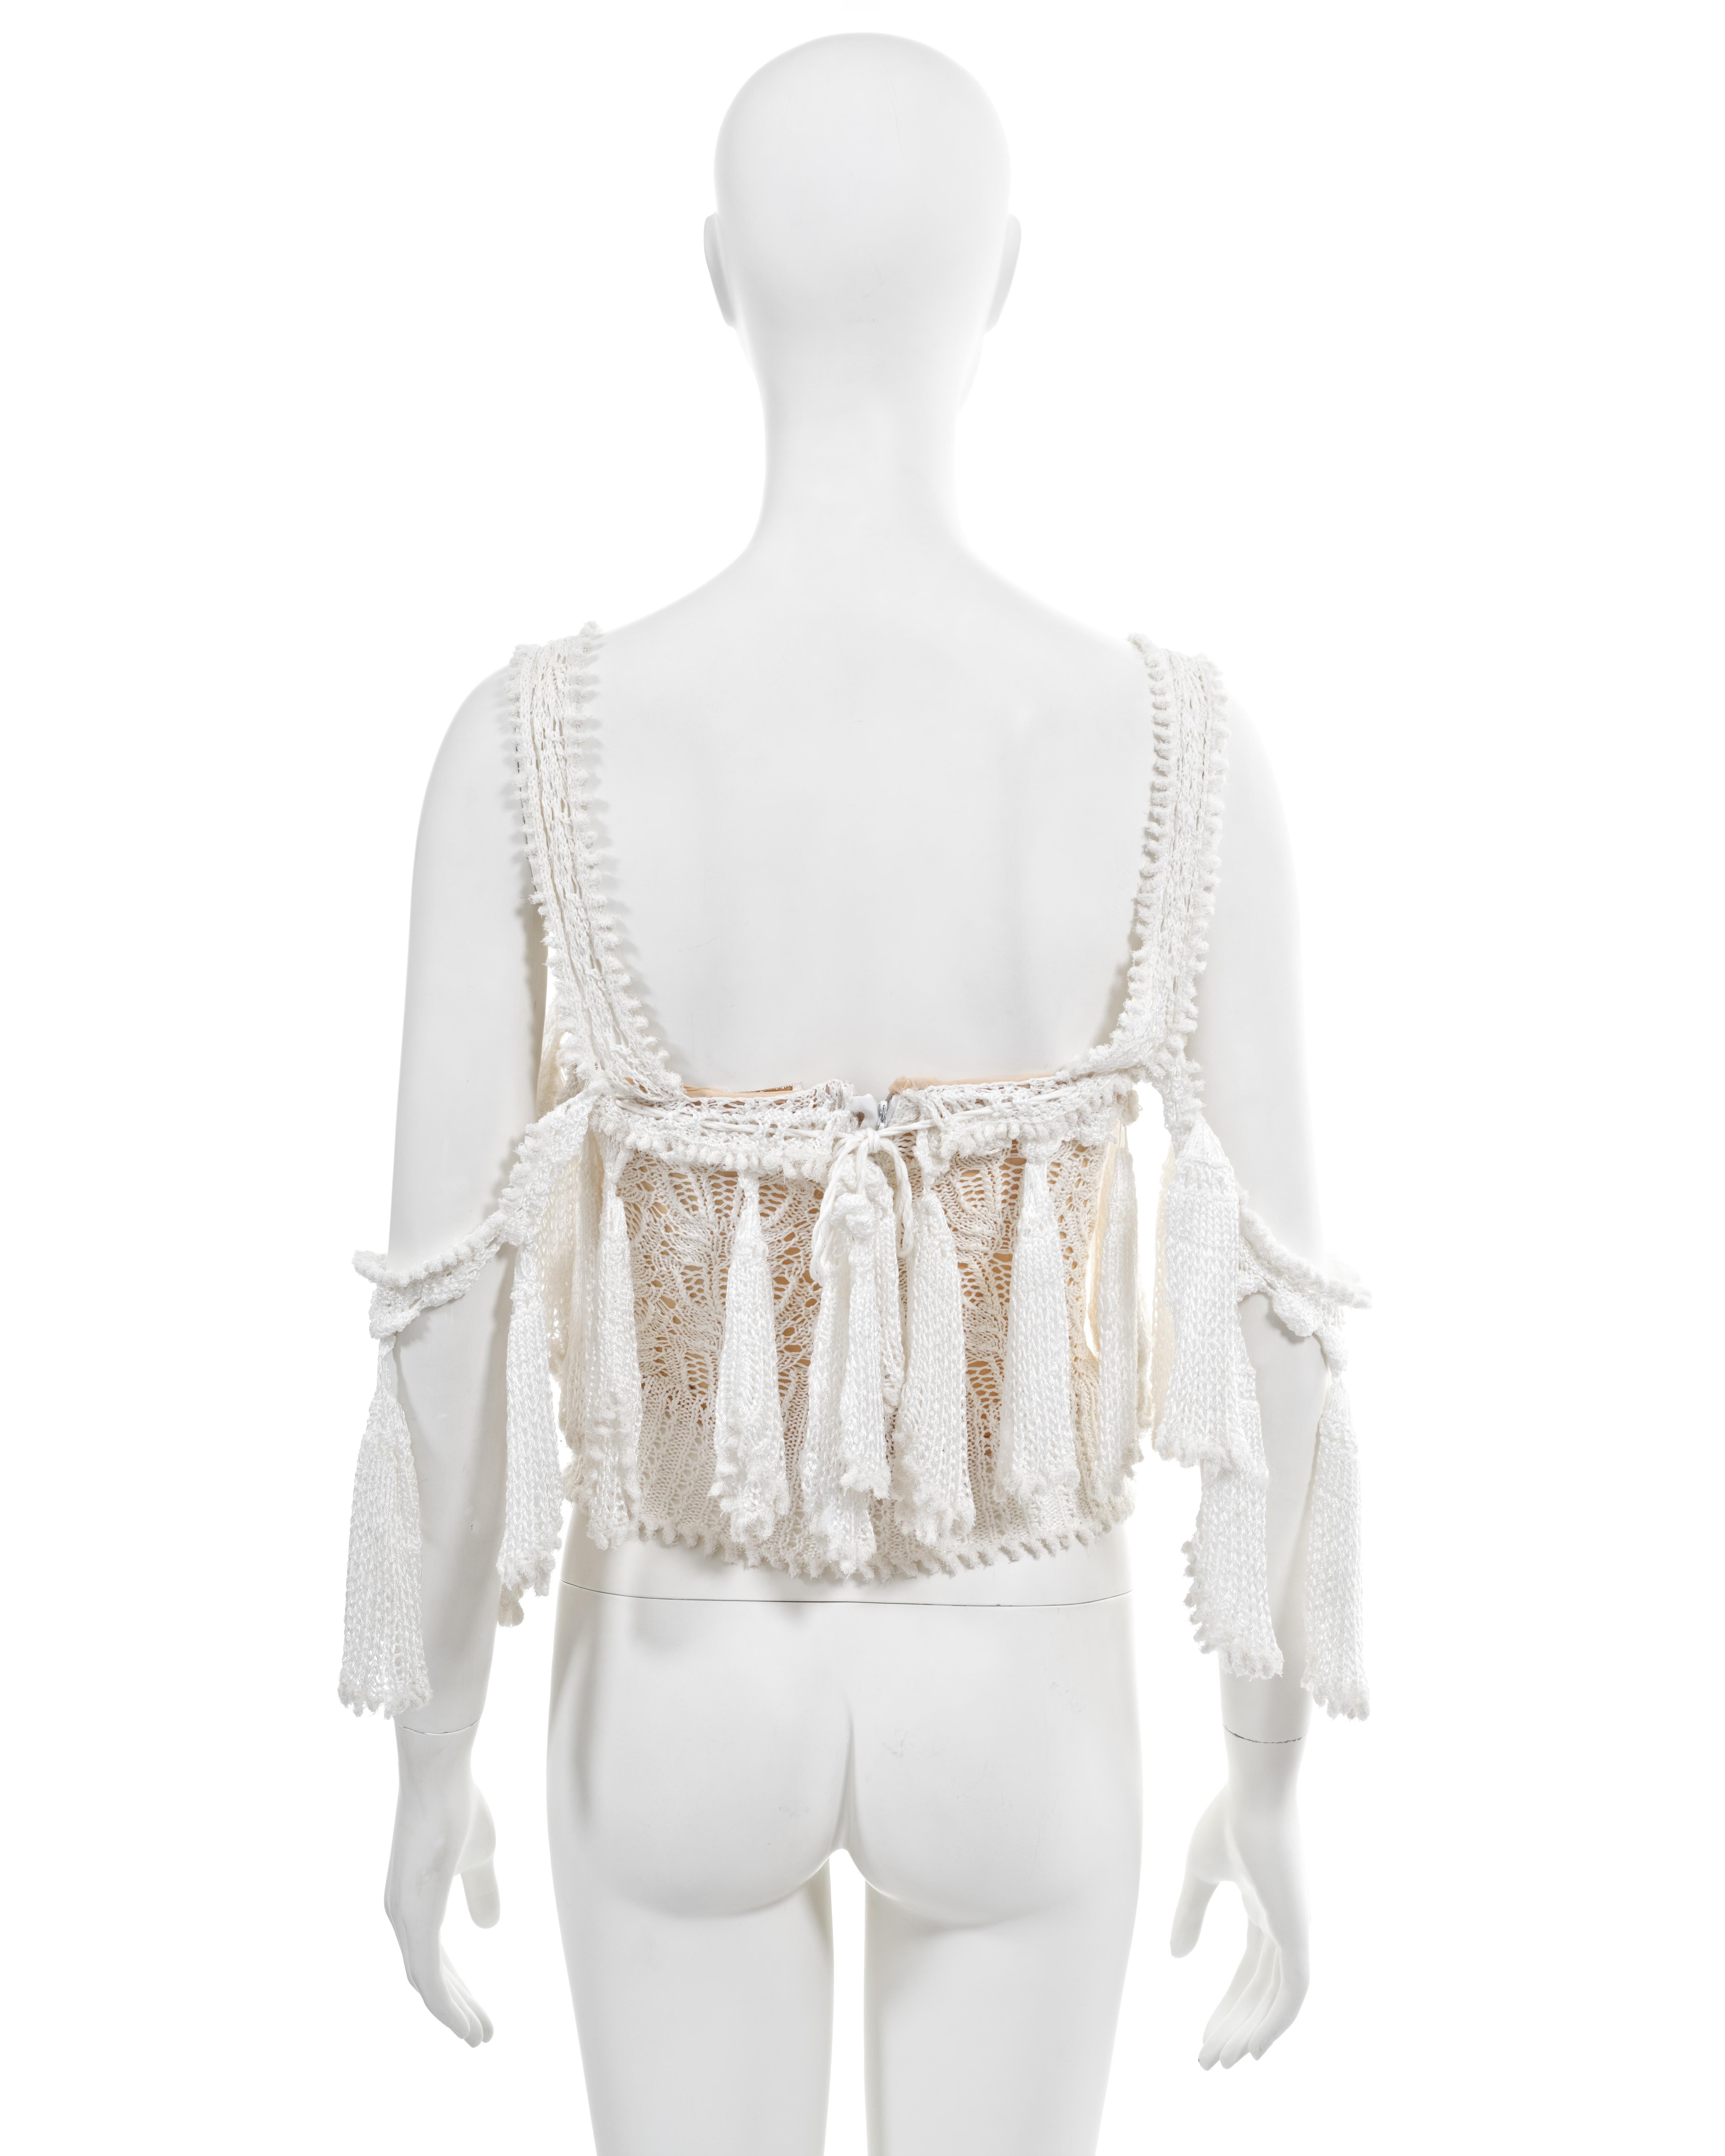 Vivienne Westwood 'Cafe Society' white knitted lace corset, ss 1994 For Sale 5